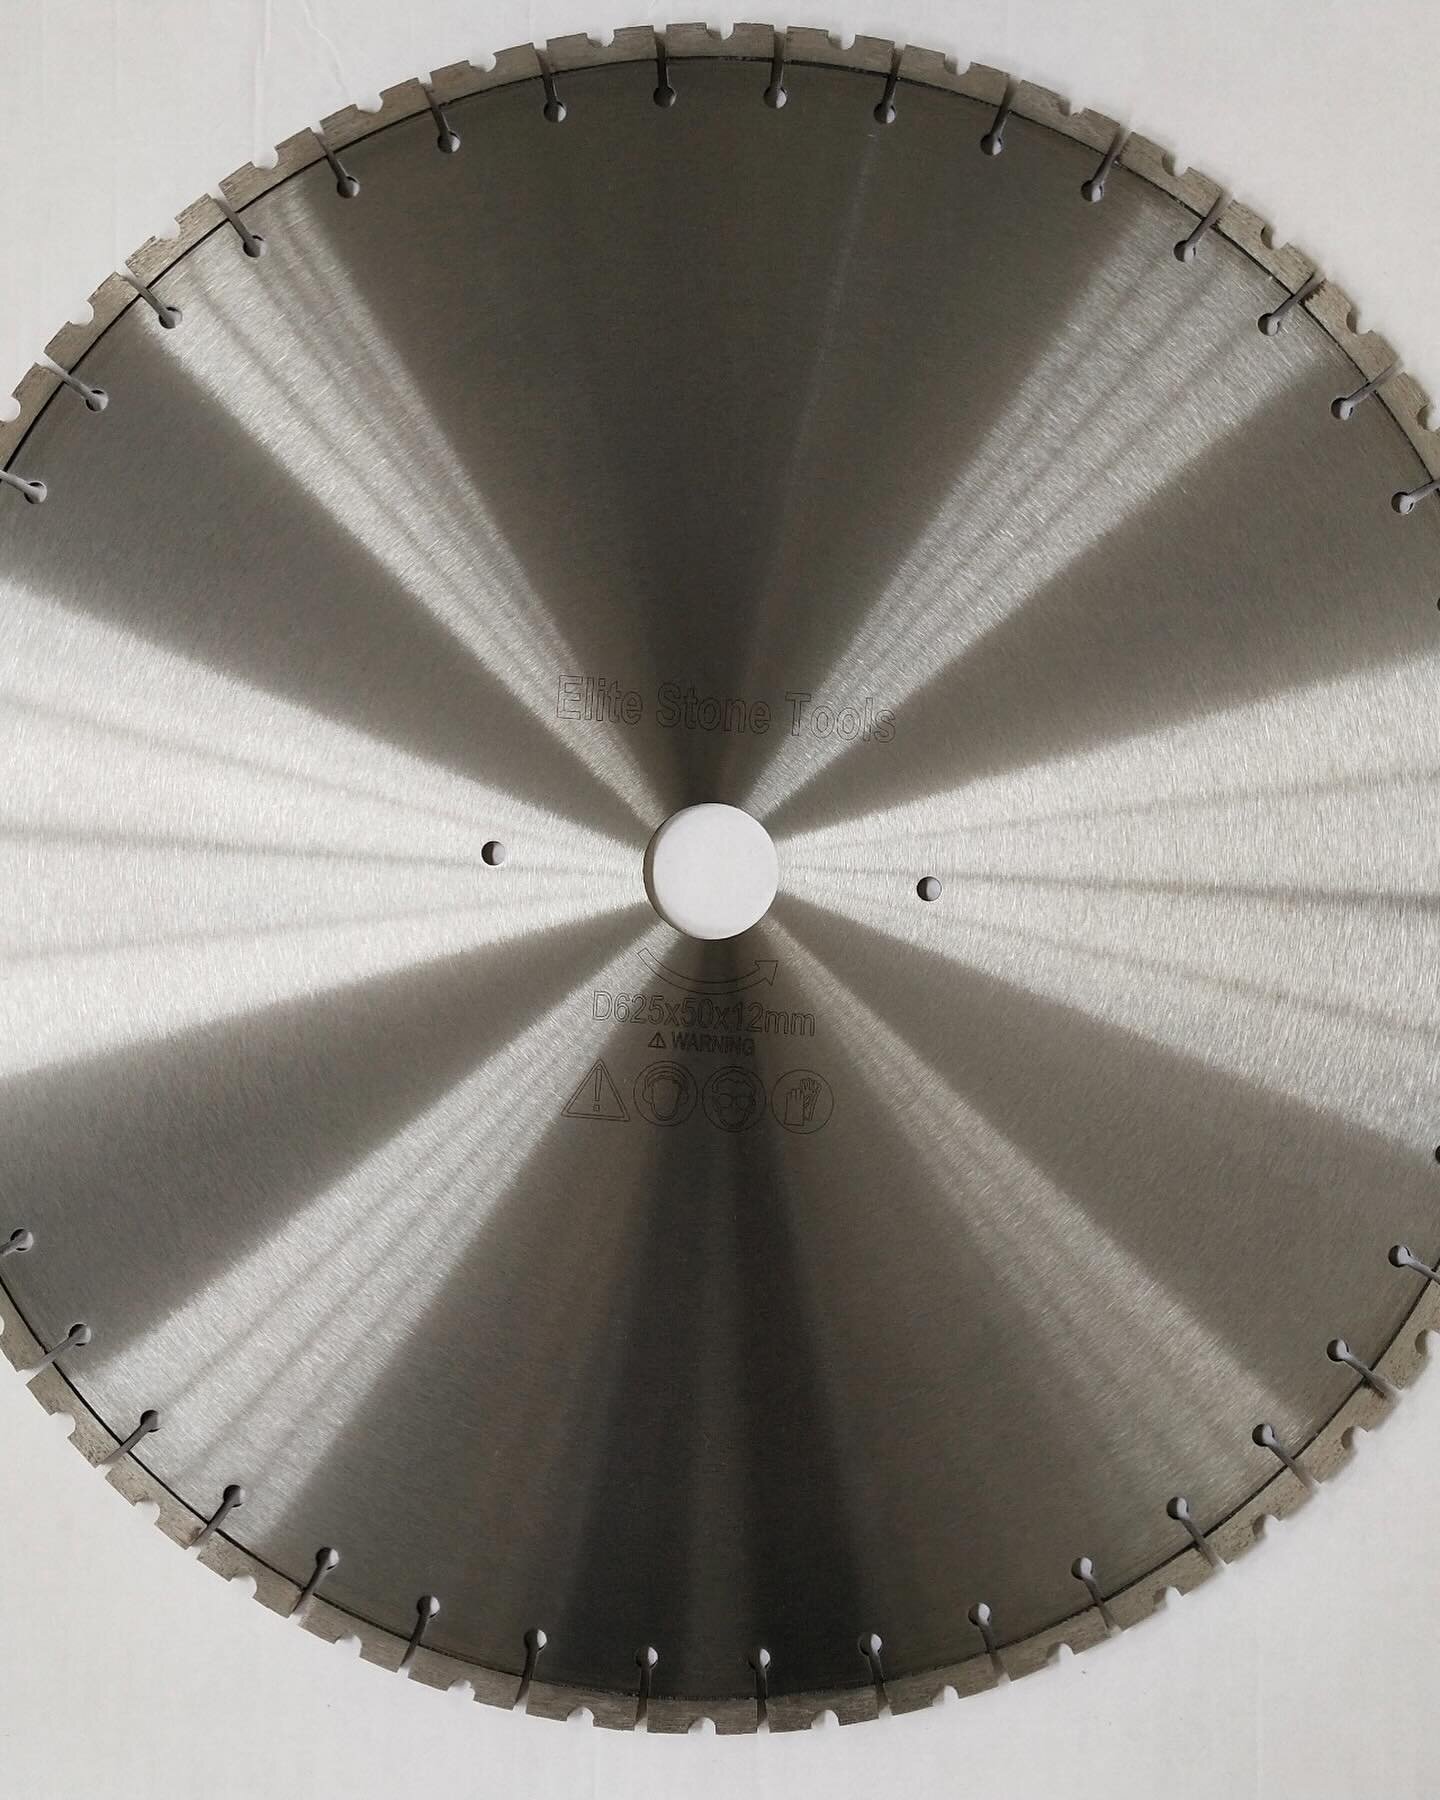 625mm x 50/60 &amp; 130mm diamond blades available for ISO cones and bridge saws we also have 450mm x 50mm blades for limestone and sandstone, for more details just drop us a message. 

#selfbuild #sandstone #stoneart #limestone #floors #refurbished 